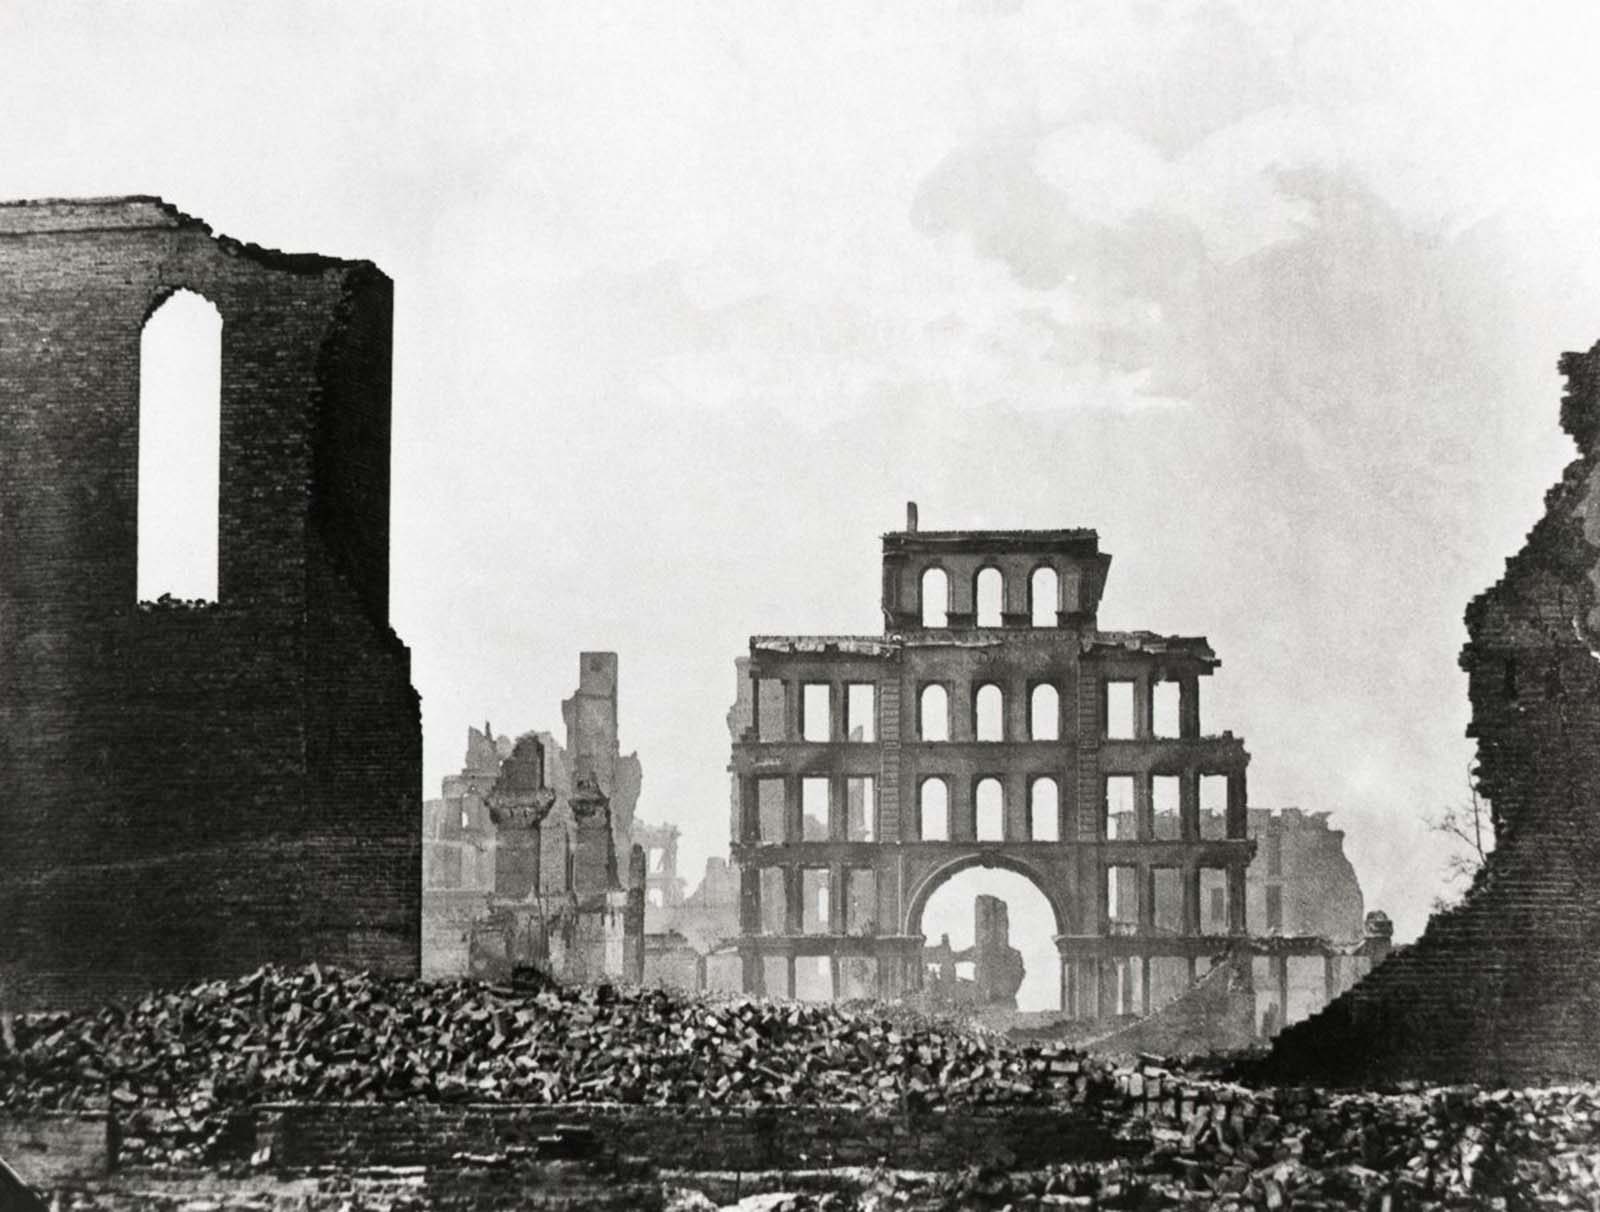 The Great Chicago Fire 1871: Historical Photos that Depict the Destruction caused by the Great Disaster